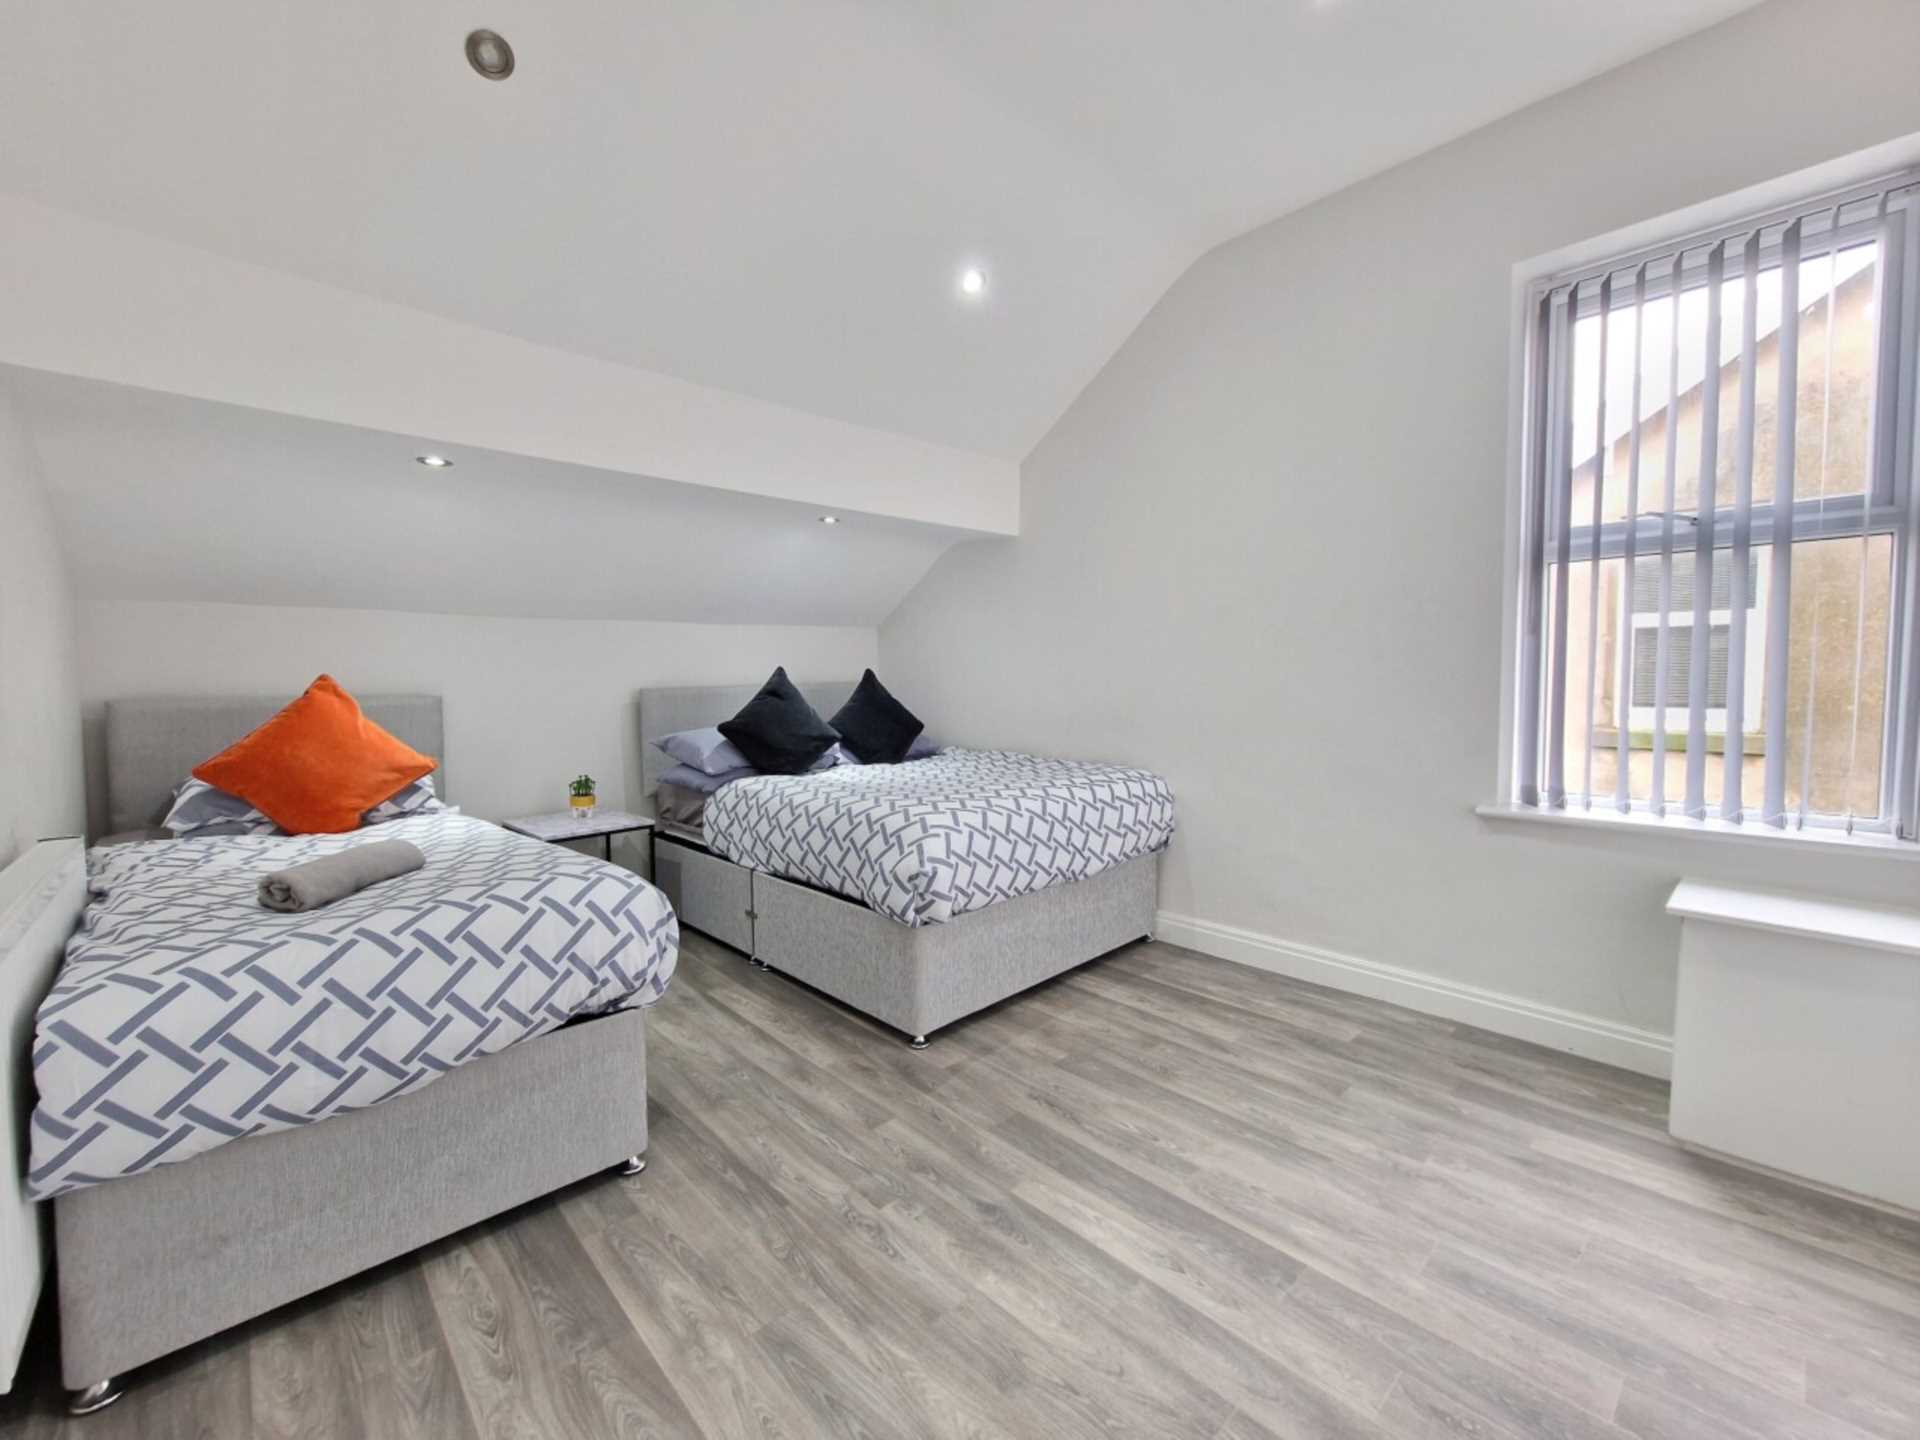 3 bed Serviced apartment for rent in Blackpool. From DY Property Services